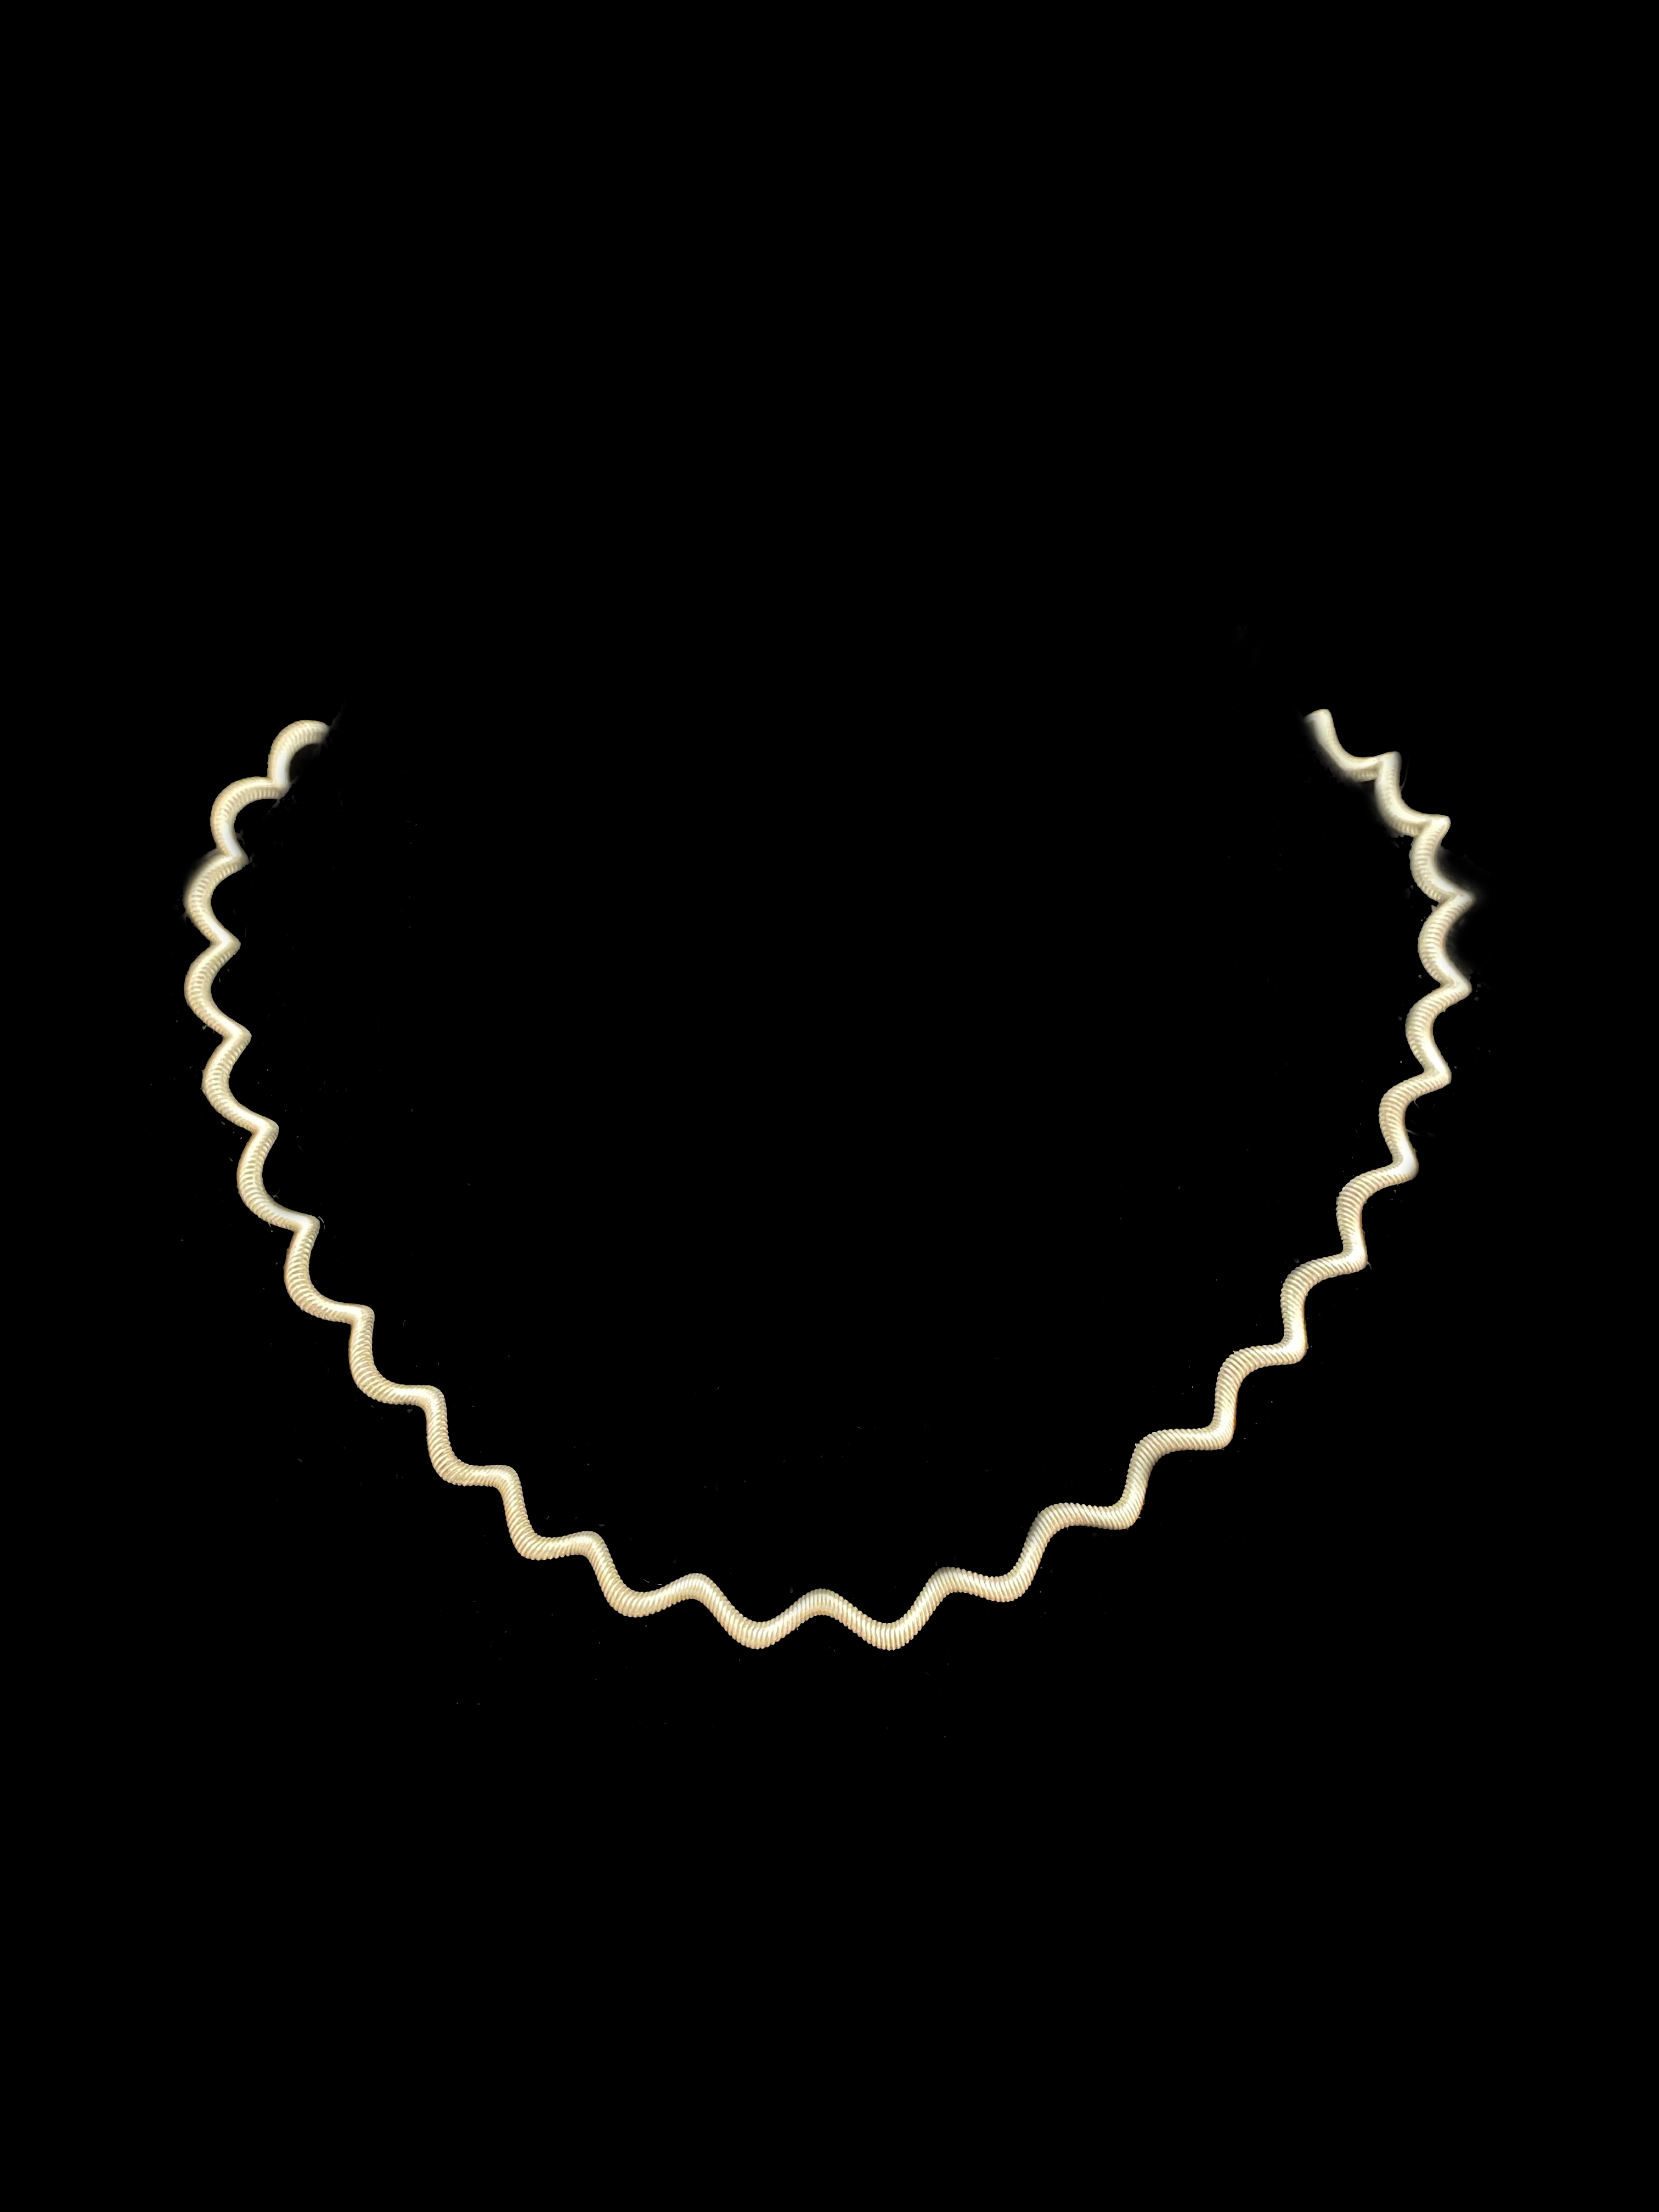 Sterling Silver Coiled Wavy Choker